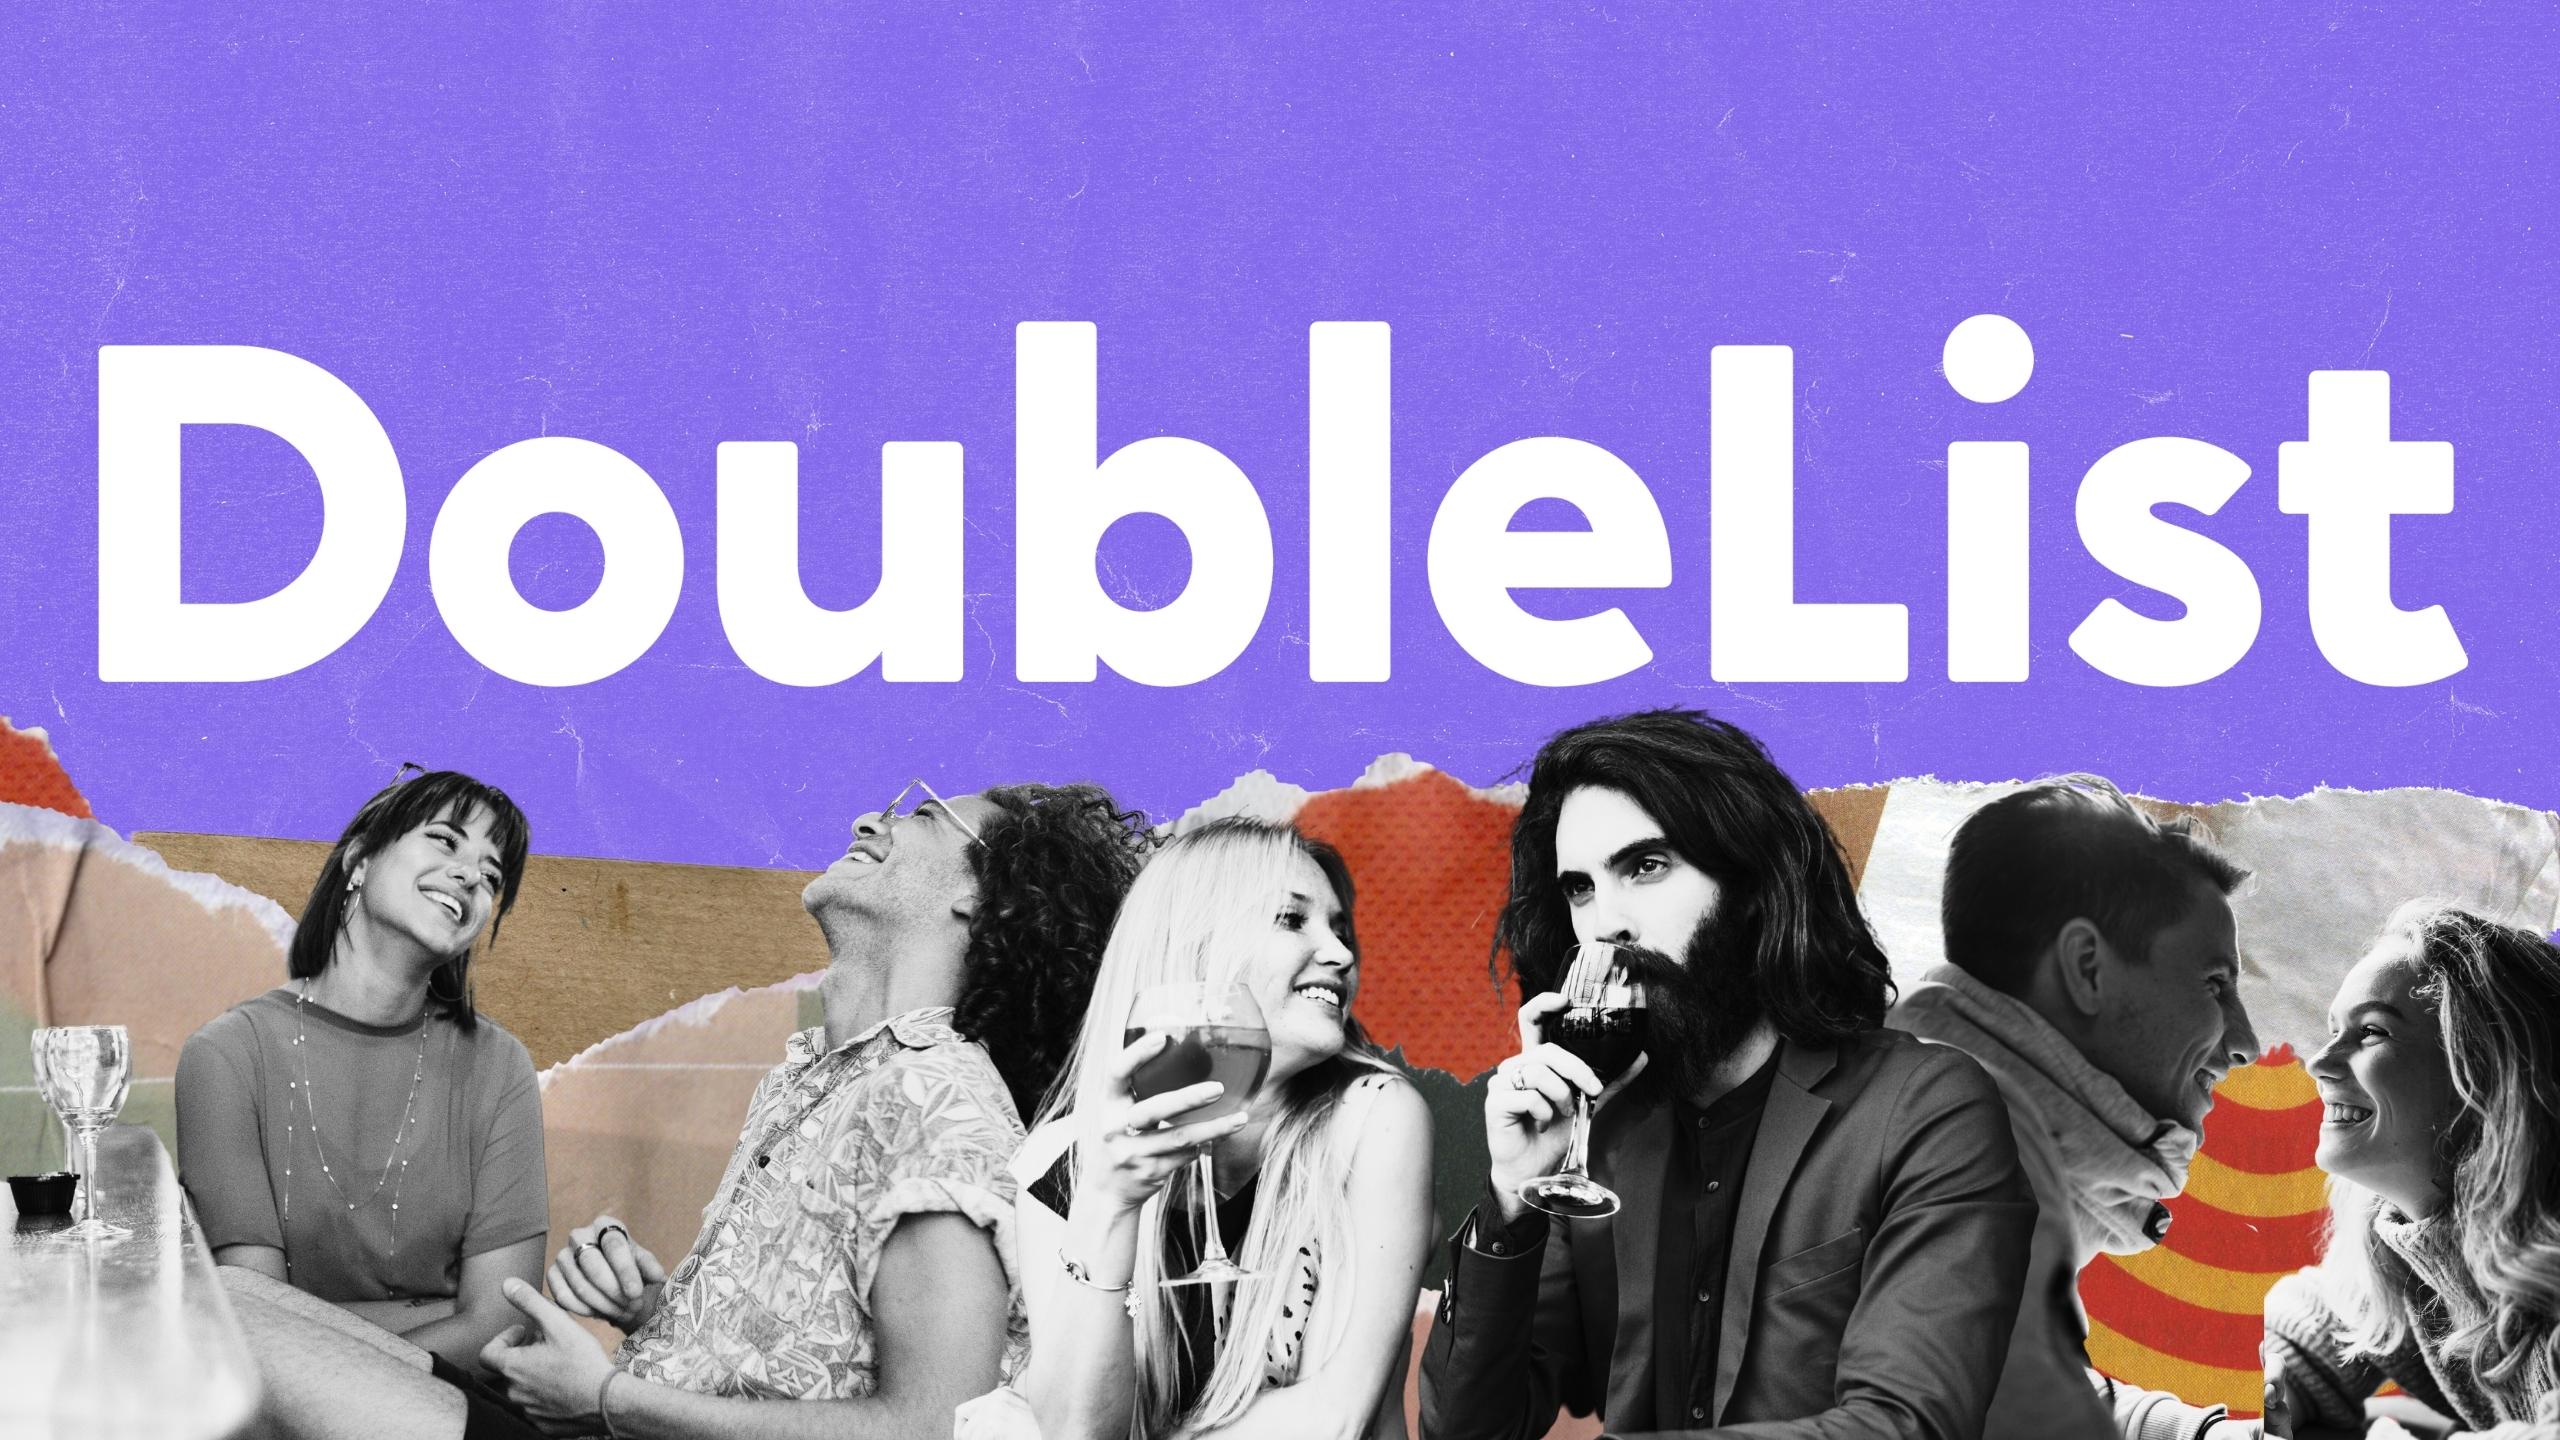 1. Double list - Dating in a bar